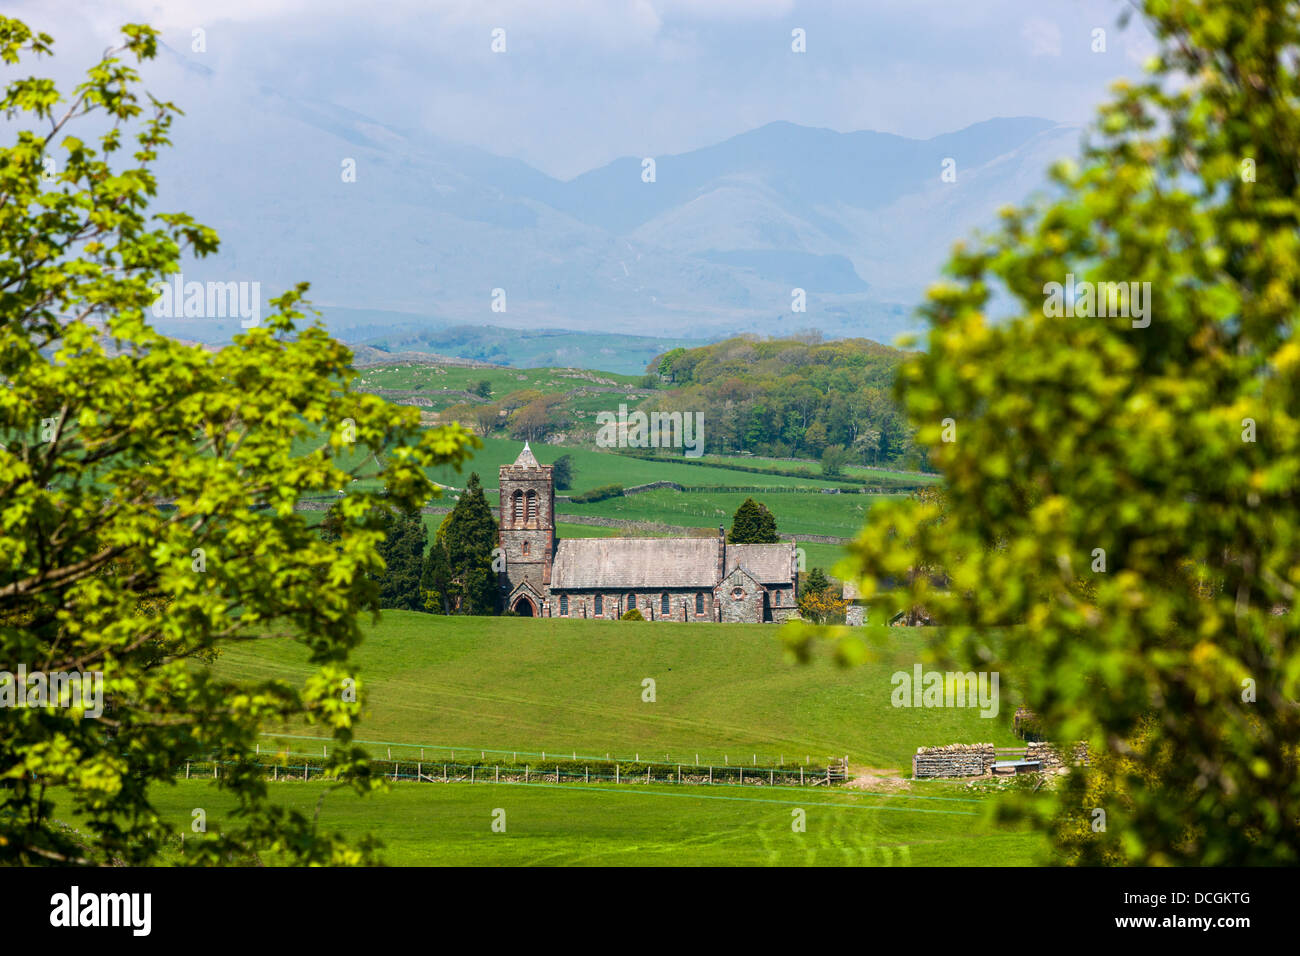 St Luke's Church near Lowick Green in the Lake District National Park, Cumbria, England, UK, Europe. Stock Photo